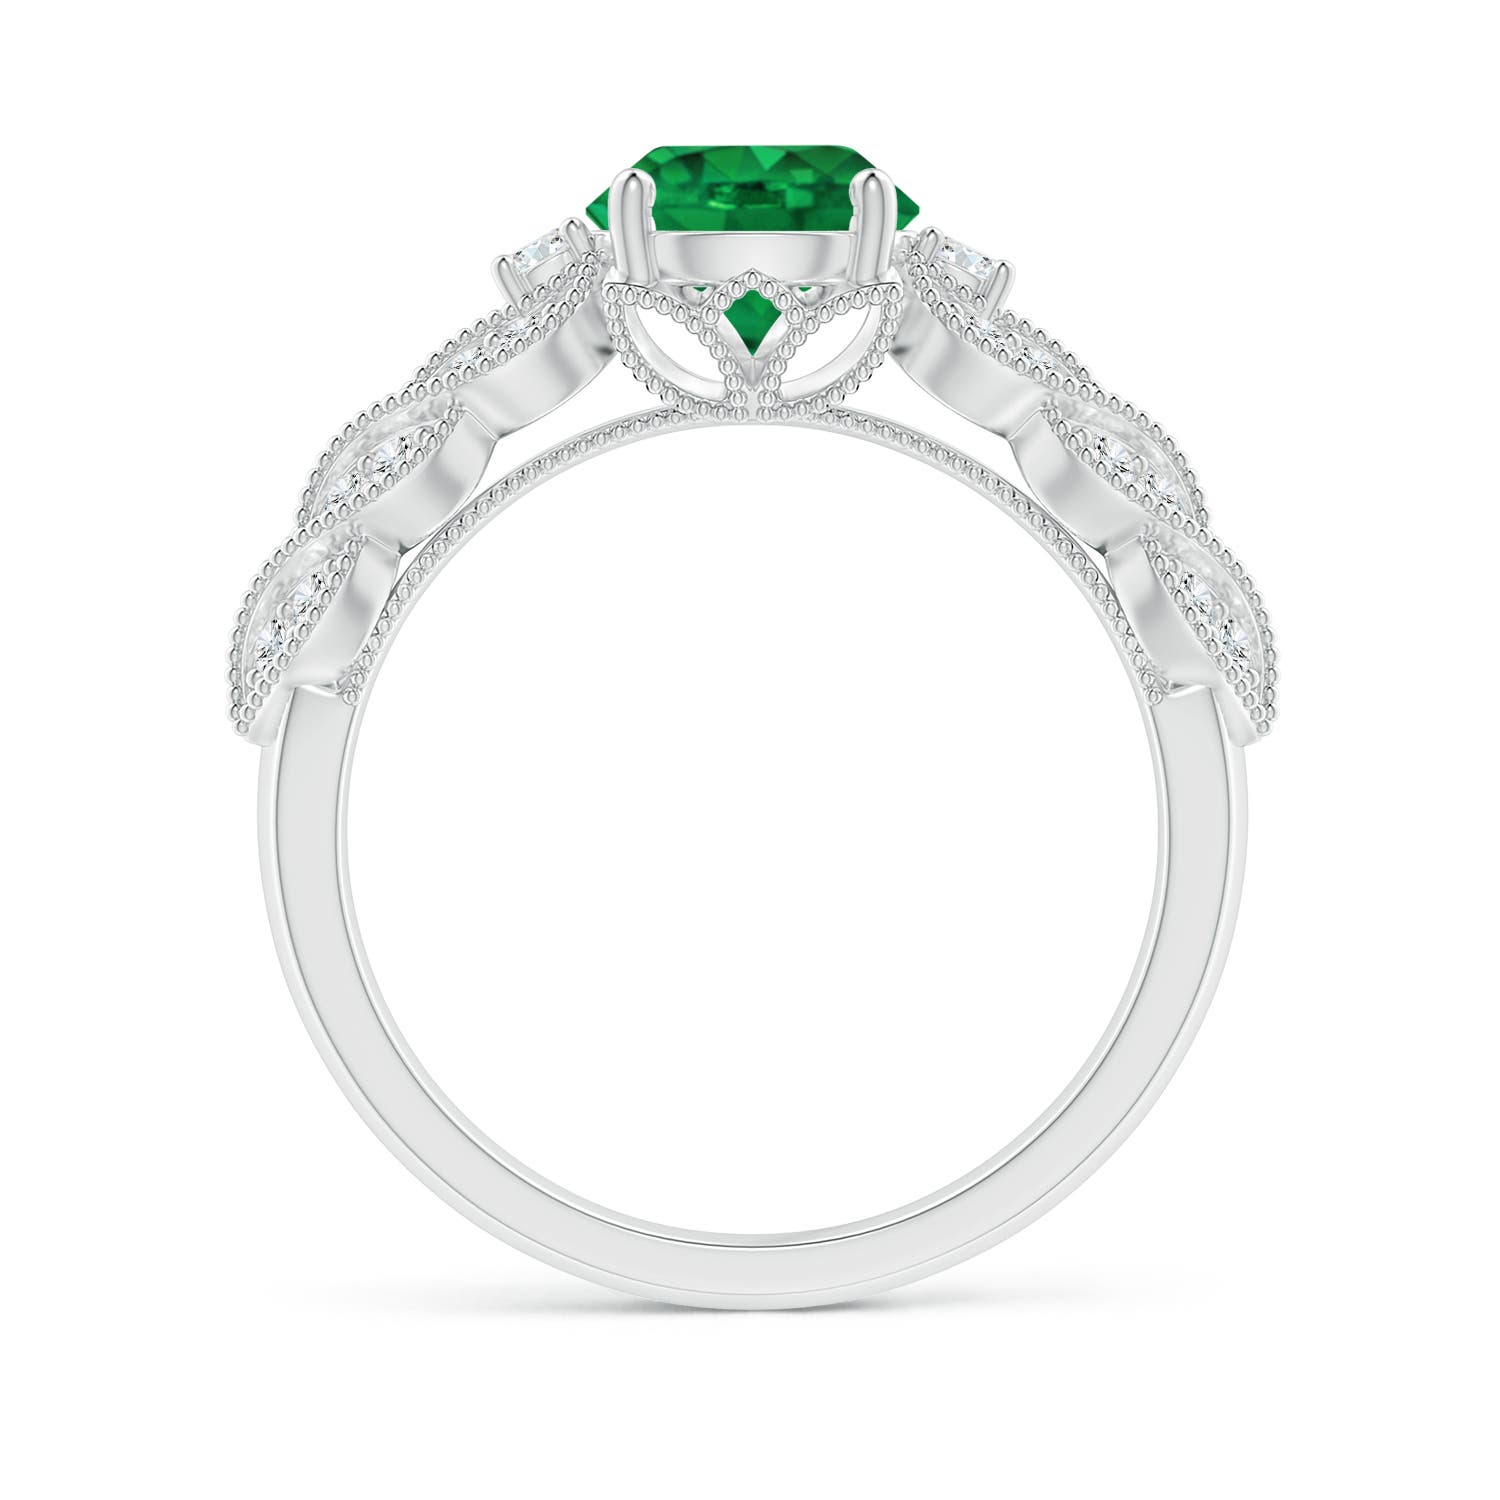 AAA - Emerald / 1.47 CT / 14 KT White Gold